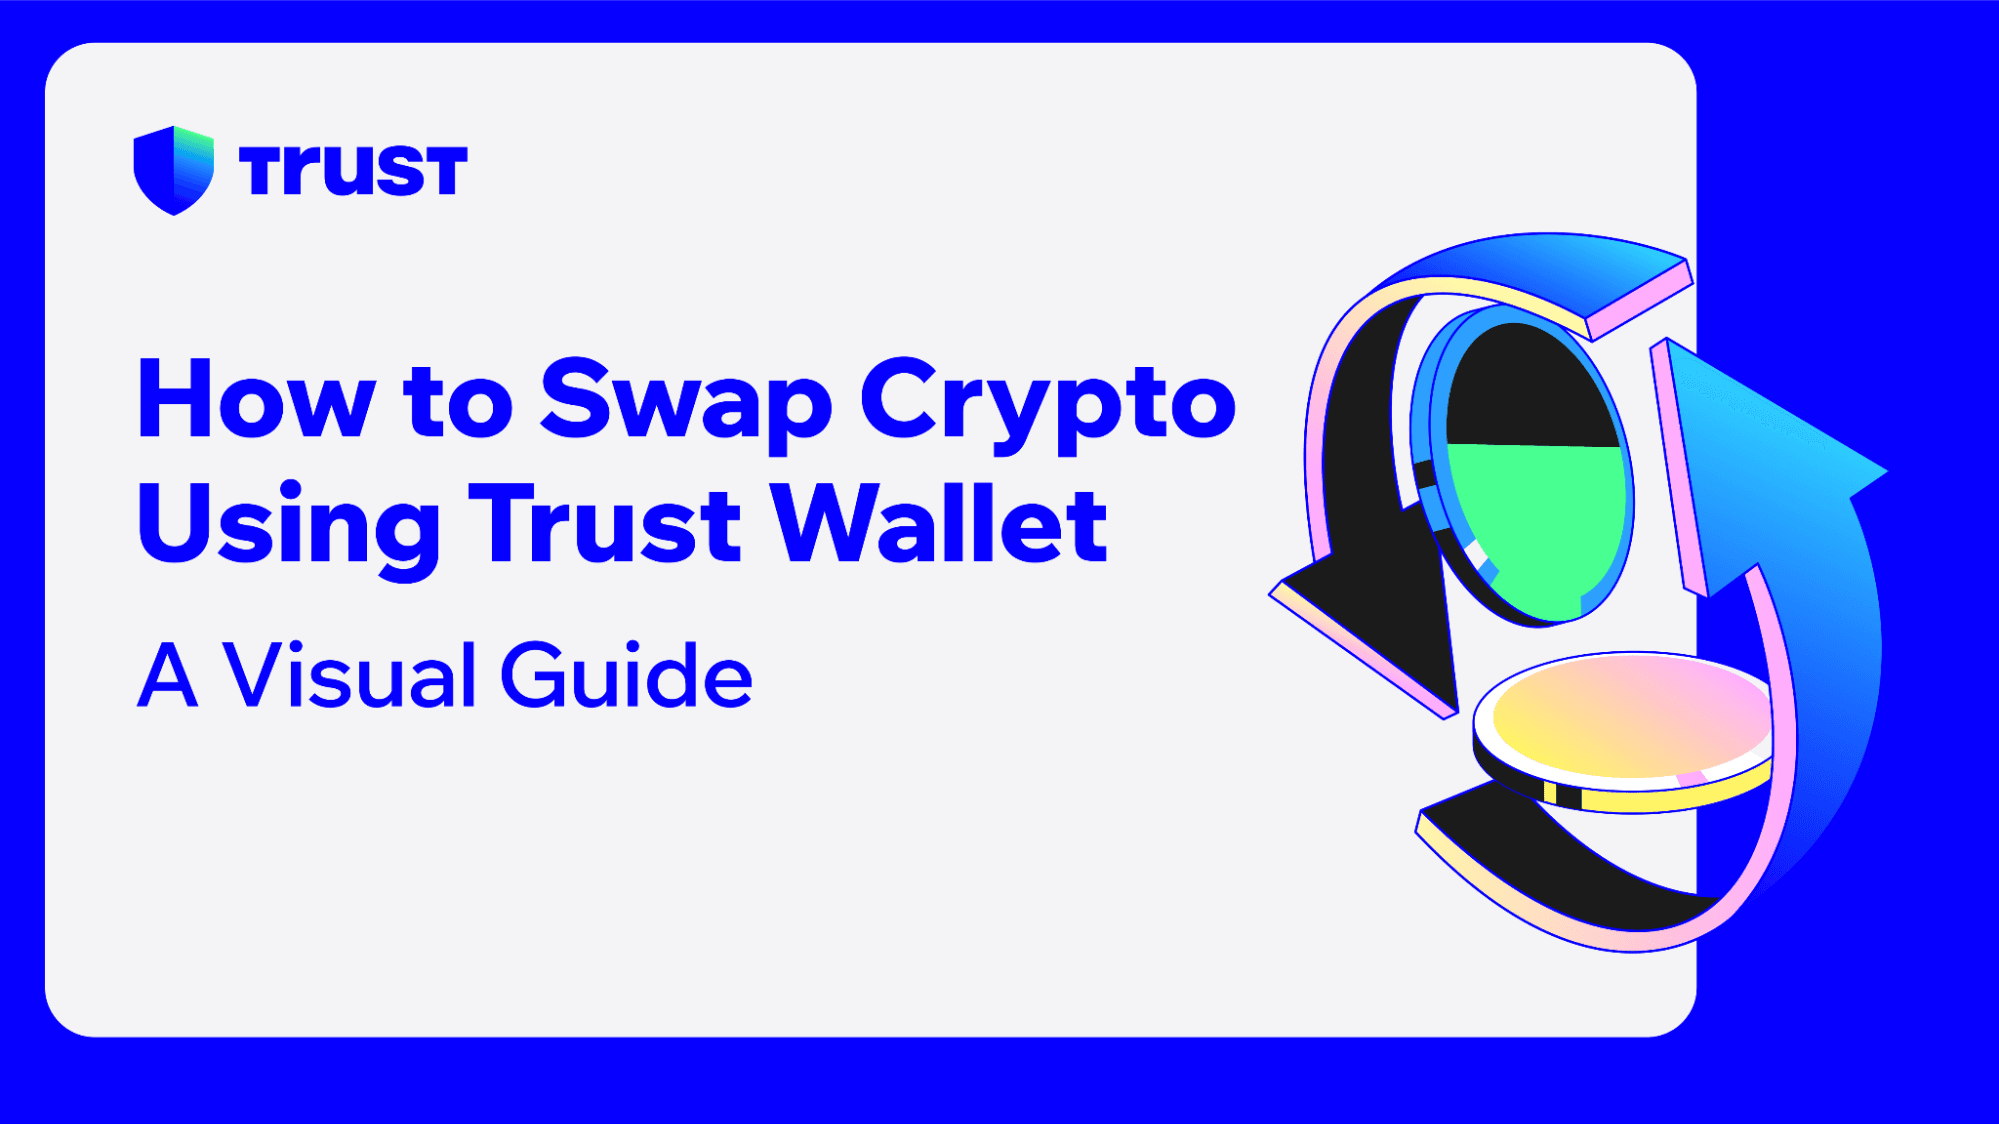 How to Swap Crypto Using Trust Wallet